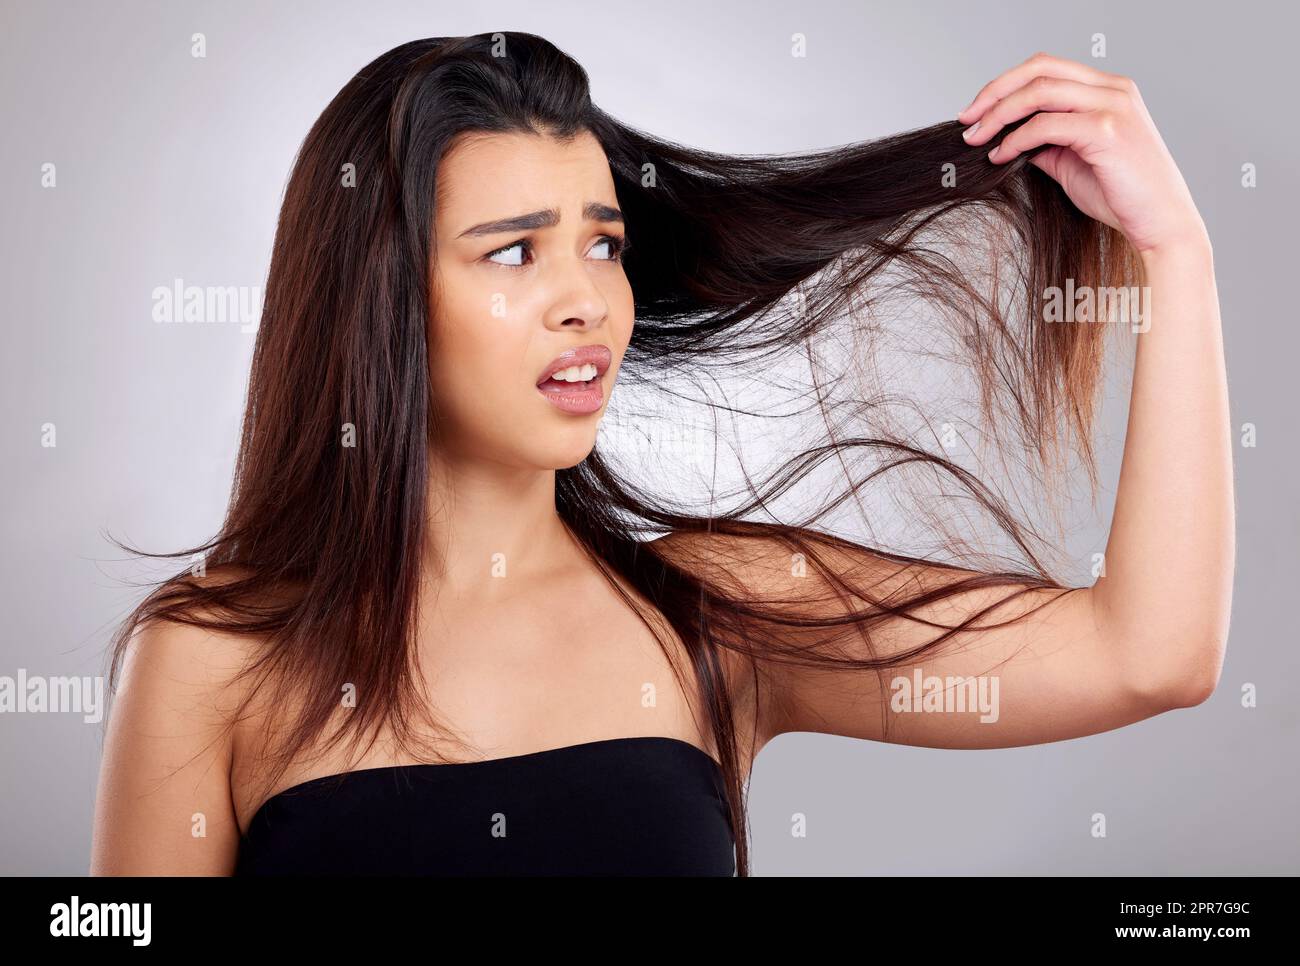 What is this. Studio shot of an attractive young woman having a bad hair day against a grey background. Stock Photo